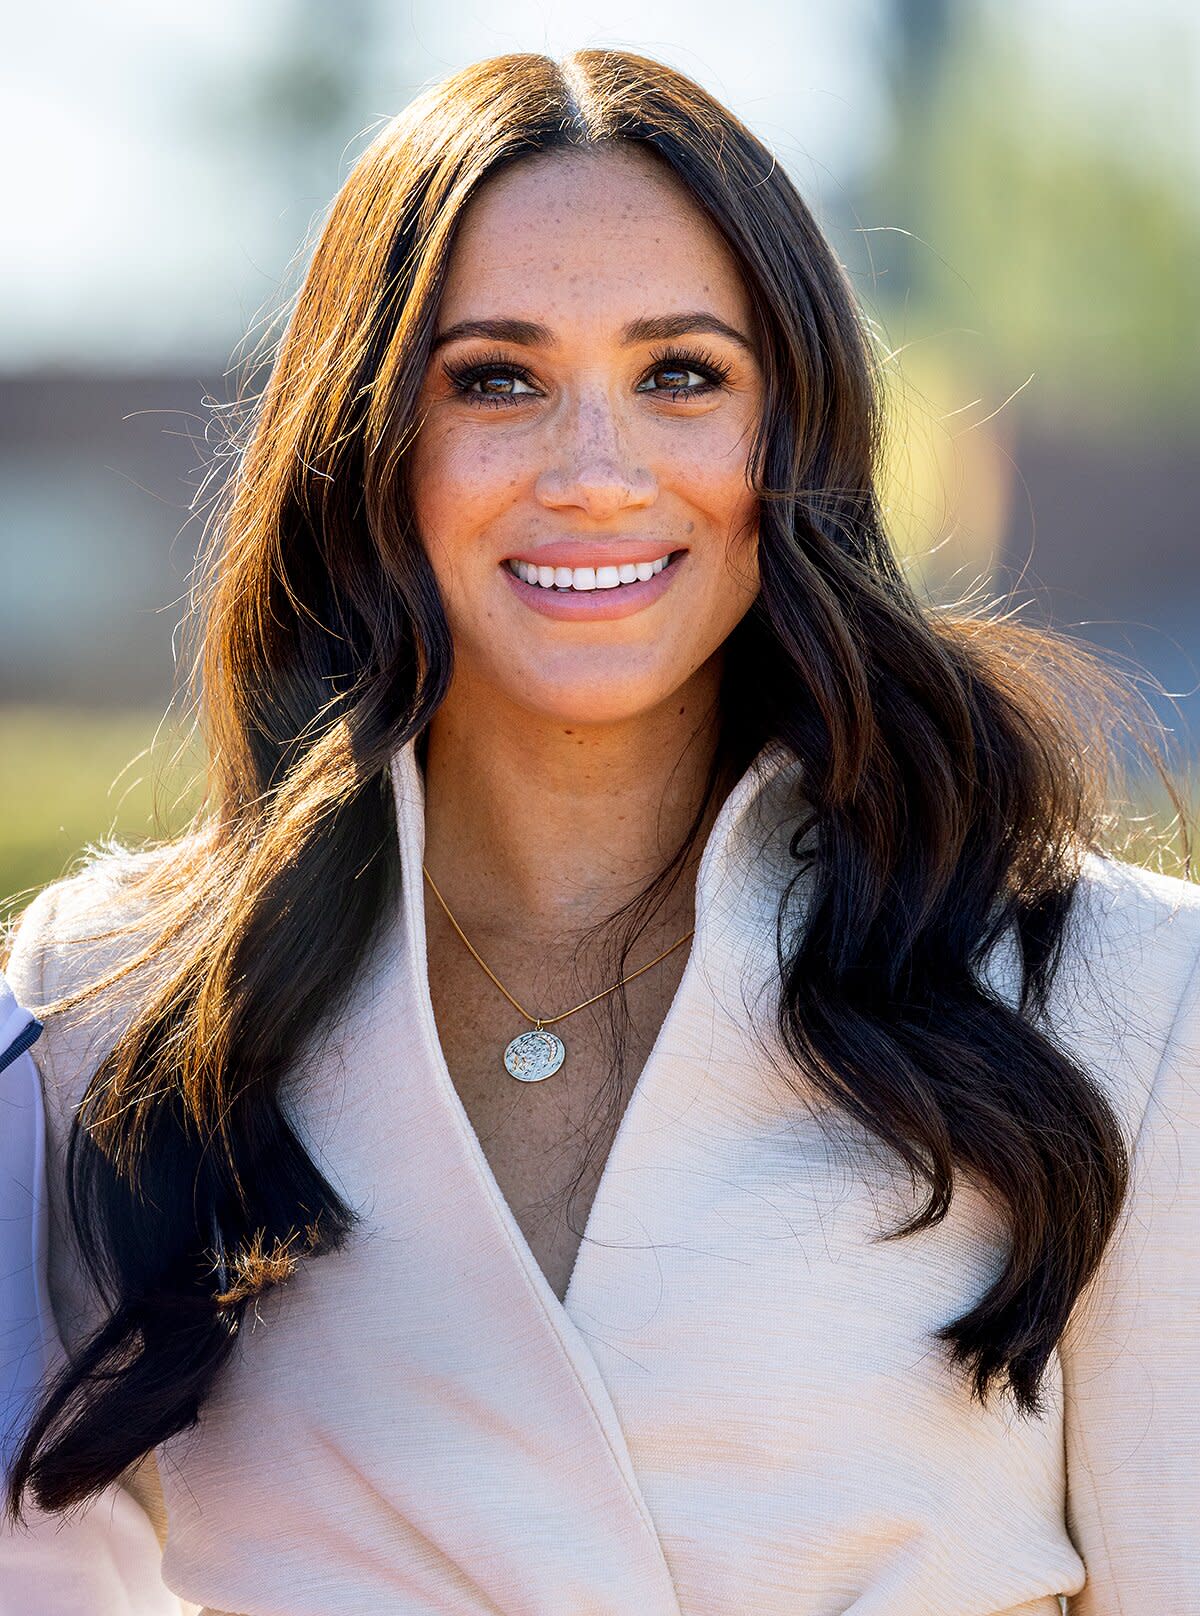 Meghan, Duchess of Sussex attends day two of the Invictus Games 2020 at Zuiderpark on April 17, 2022 in The Hague, Netherlands.